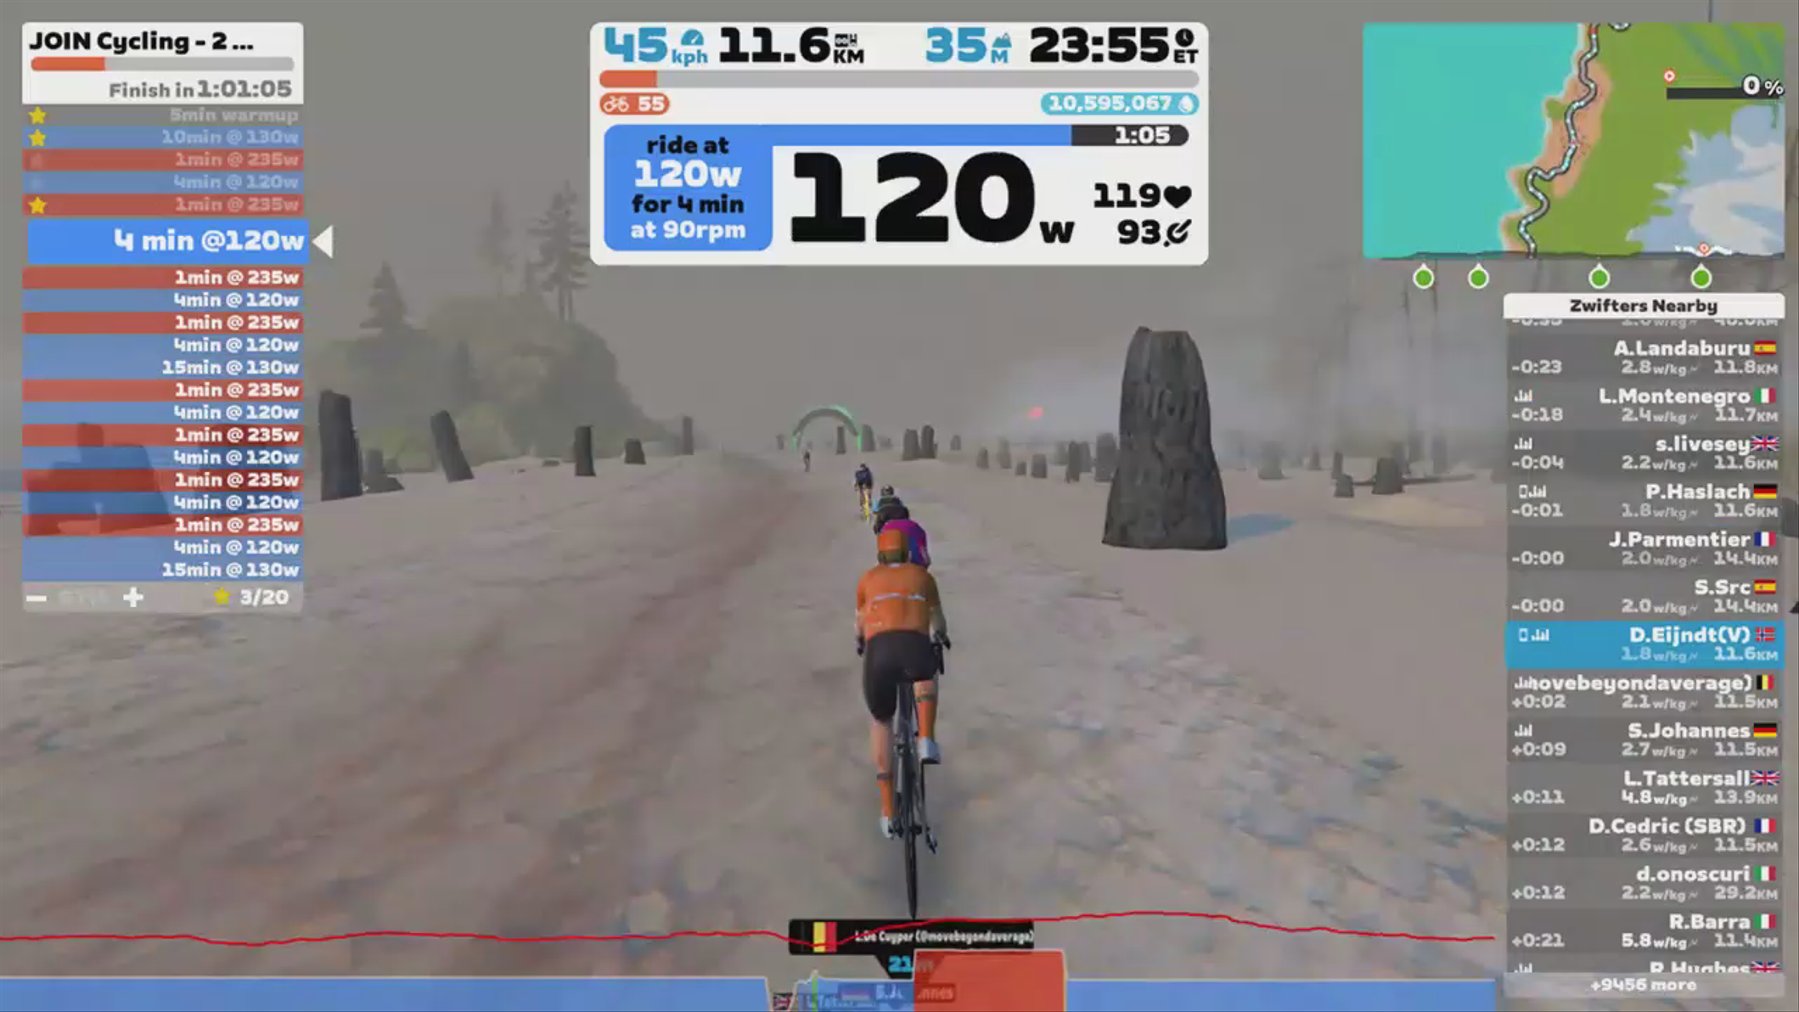 Zwift - JOIN Cycling - 2 sets 4x 1 min strength in Watopia